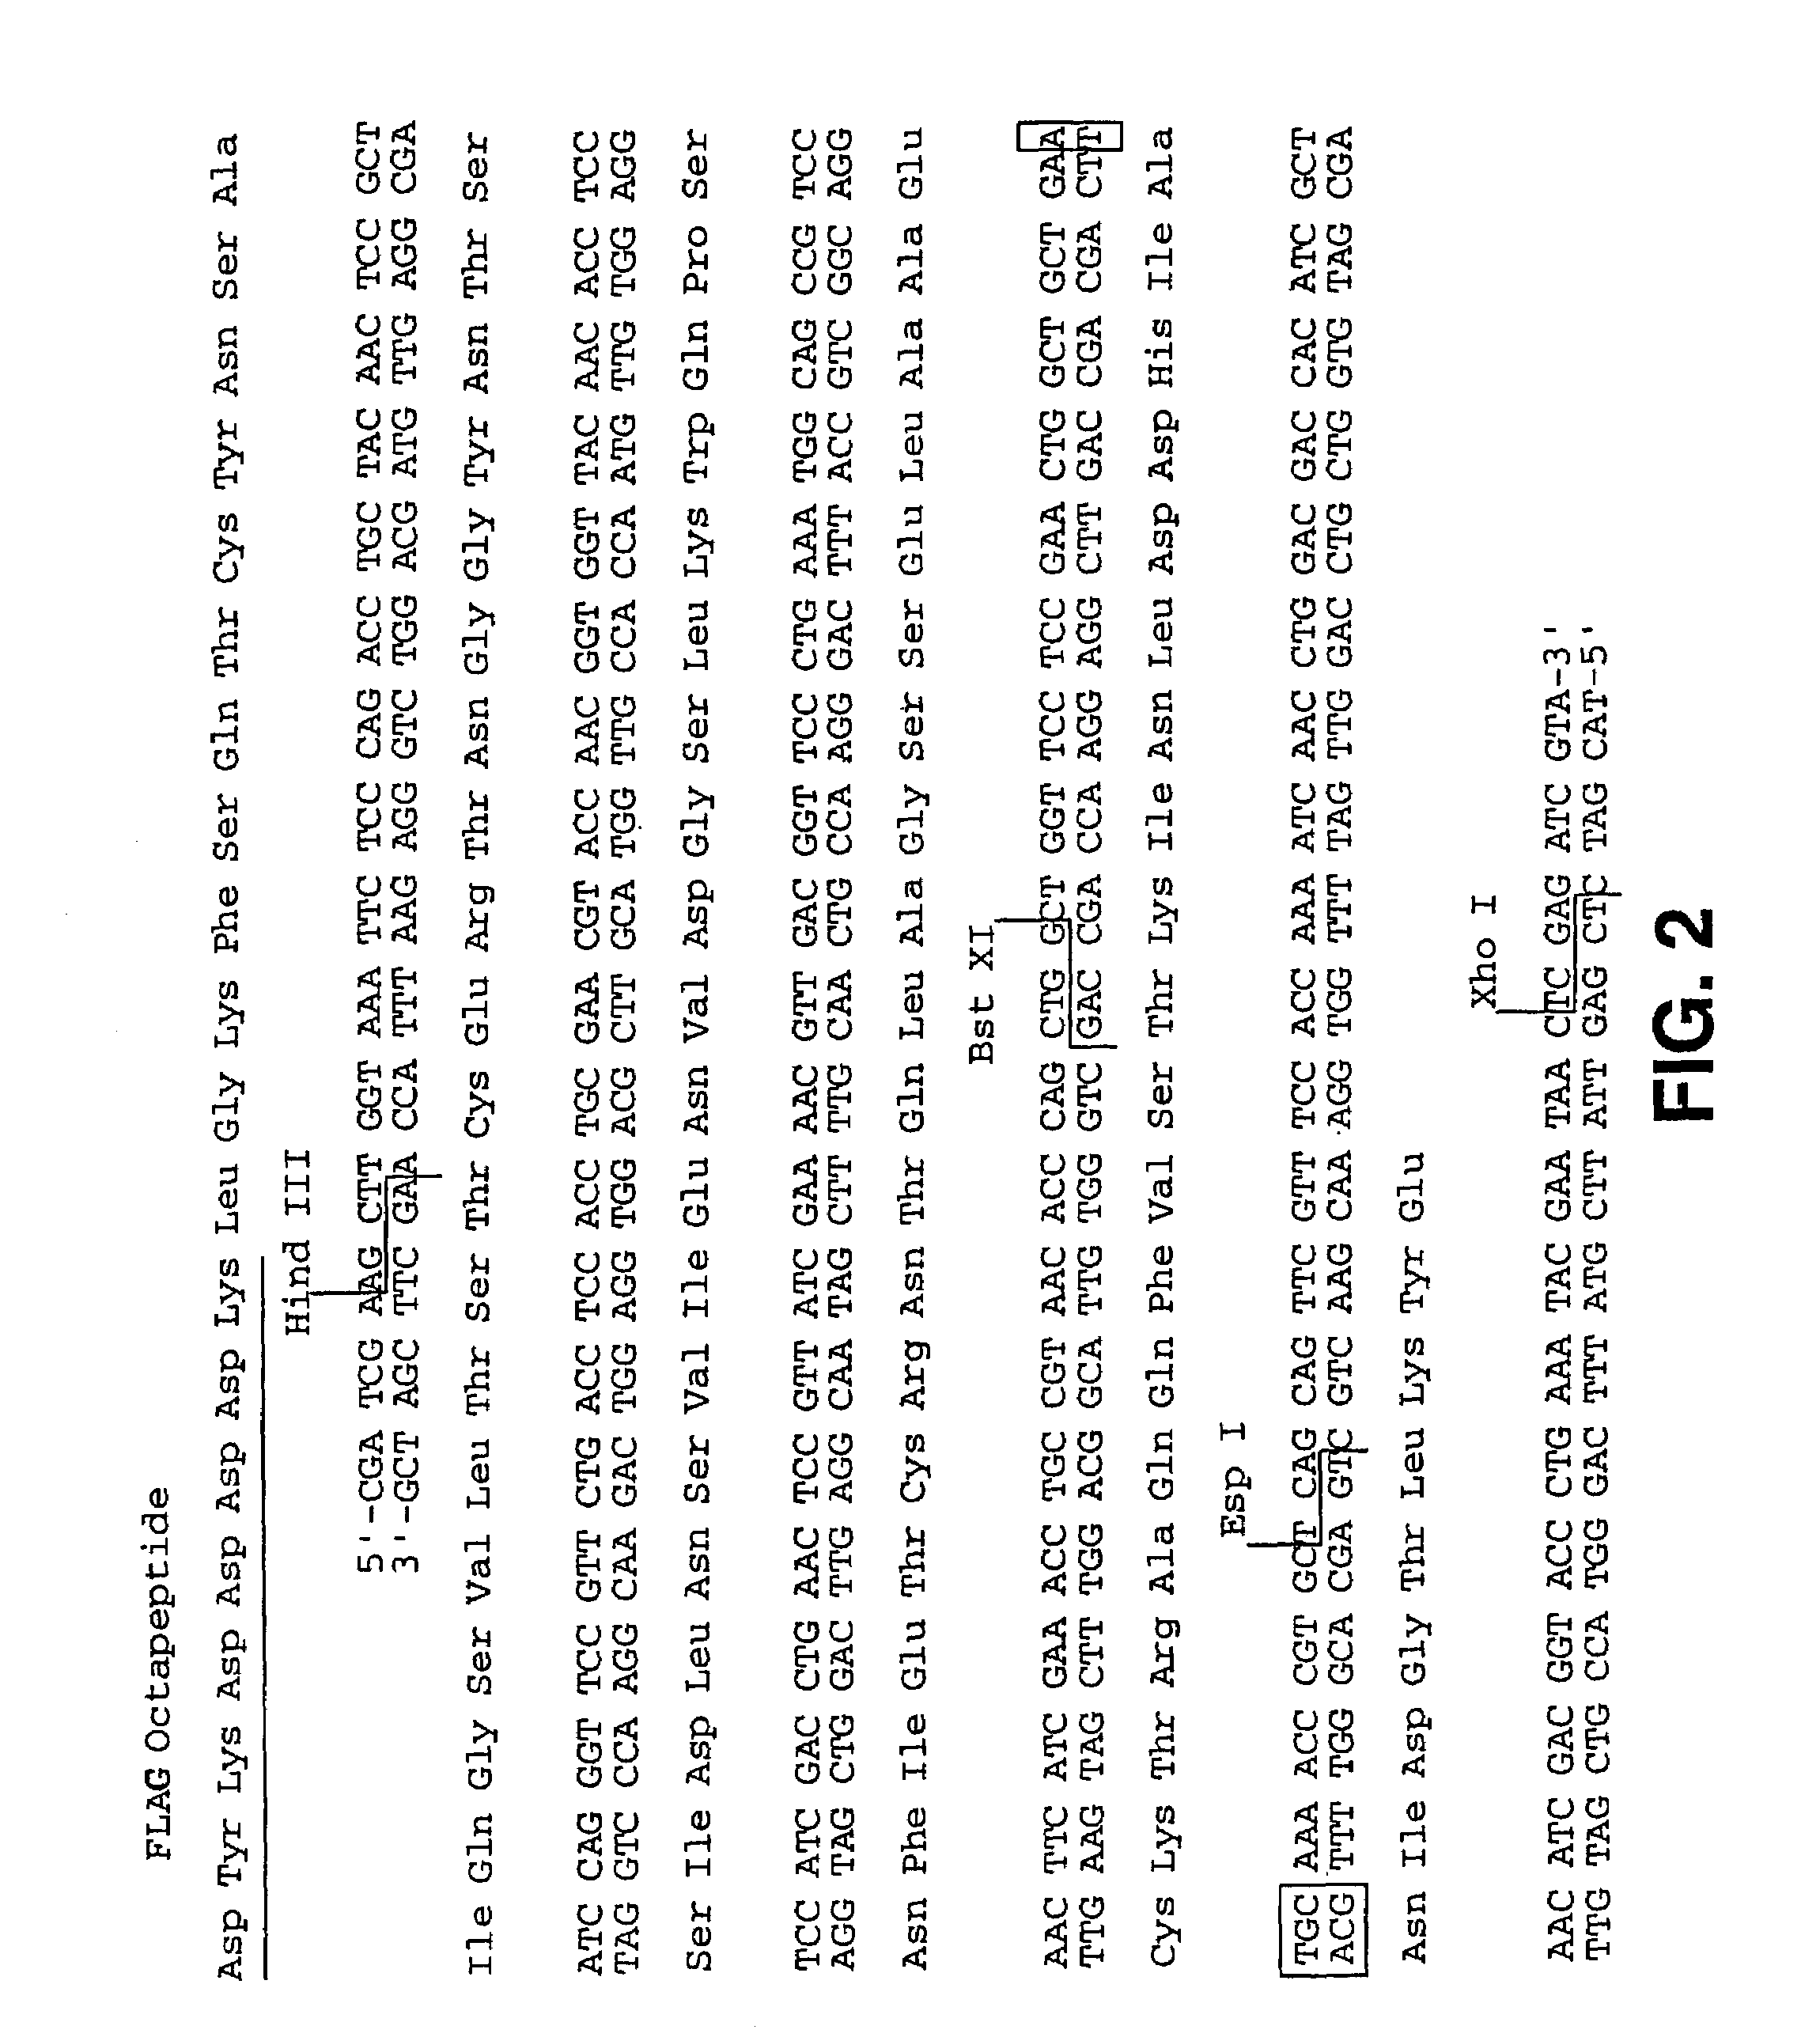 Cyanovirin conjugates and matrix-anchored cyanovirin and related compositions and methods of use